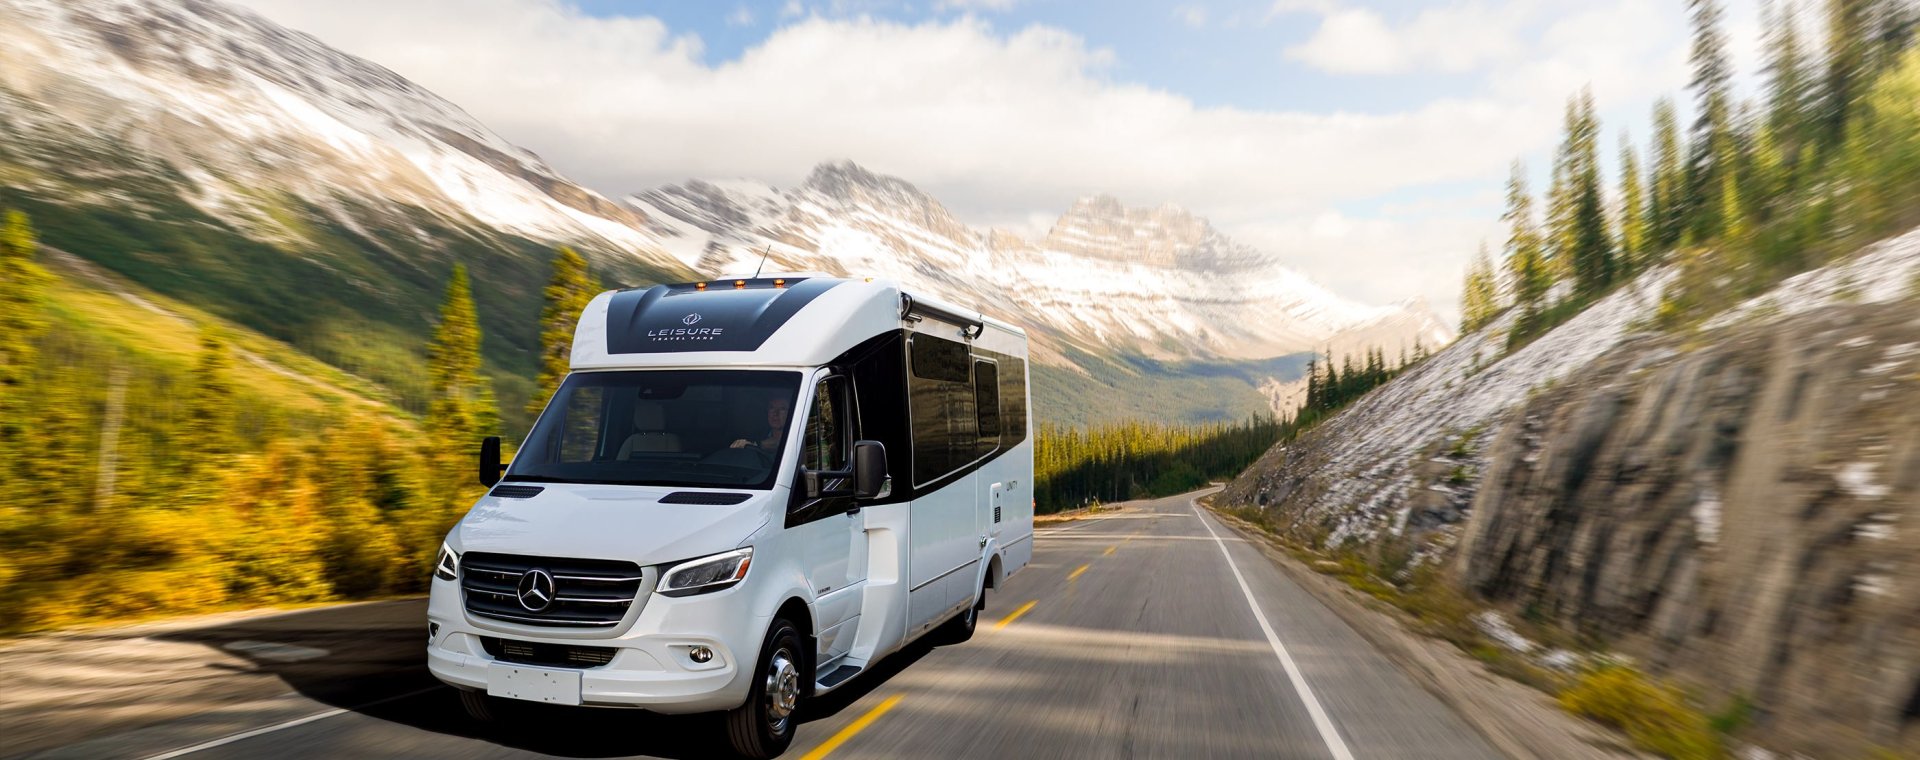 White 2020 Leisure Travel Vans Unity RV driving through a forested mountain road